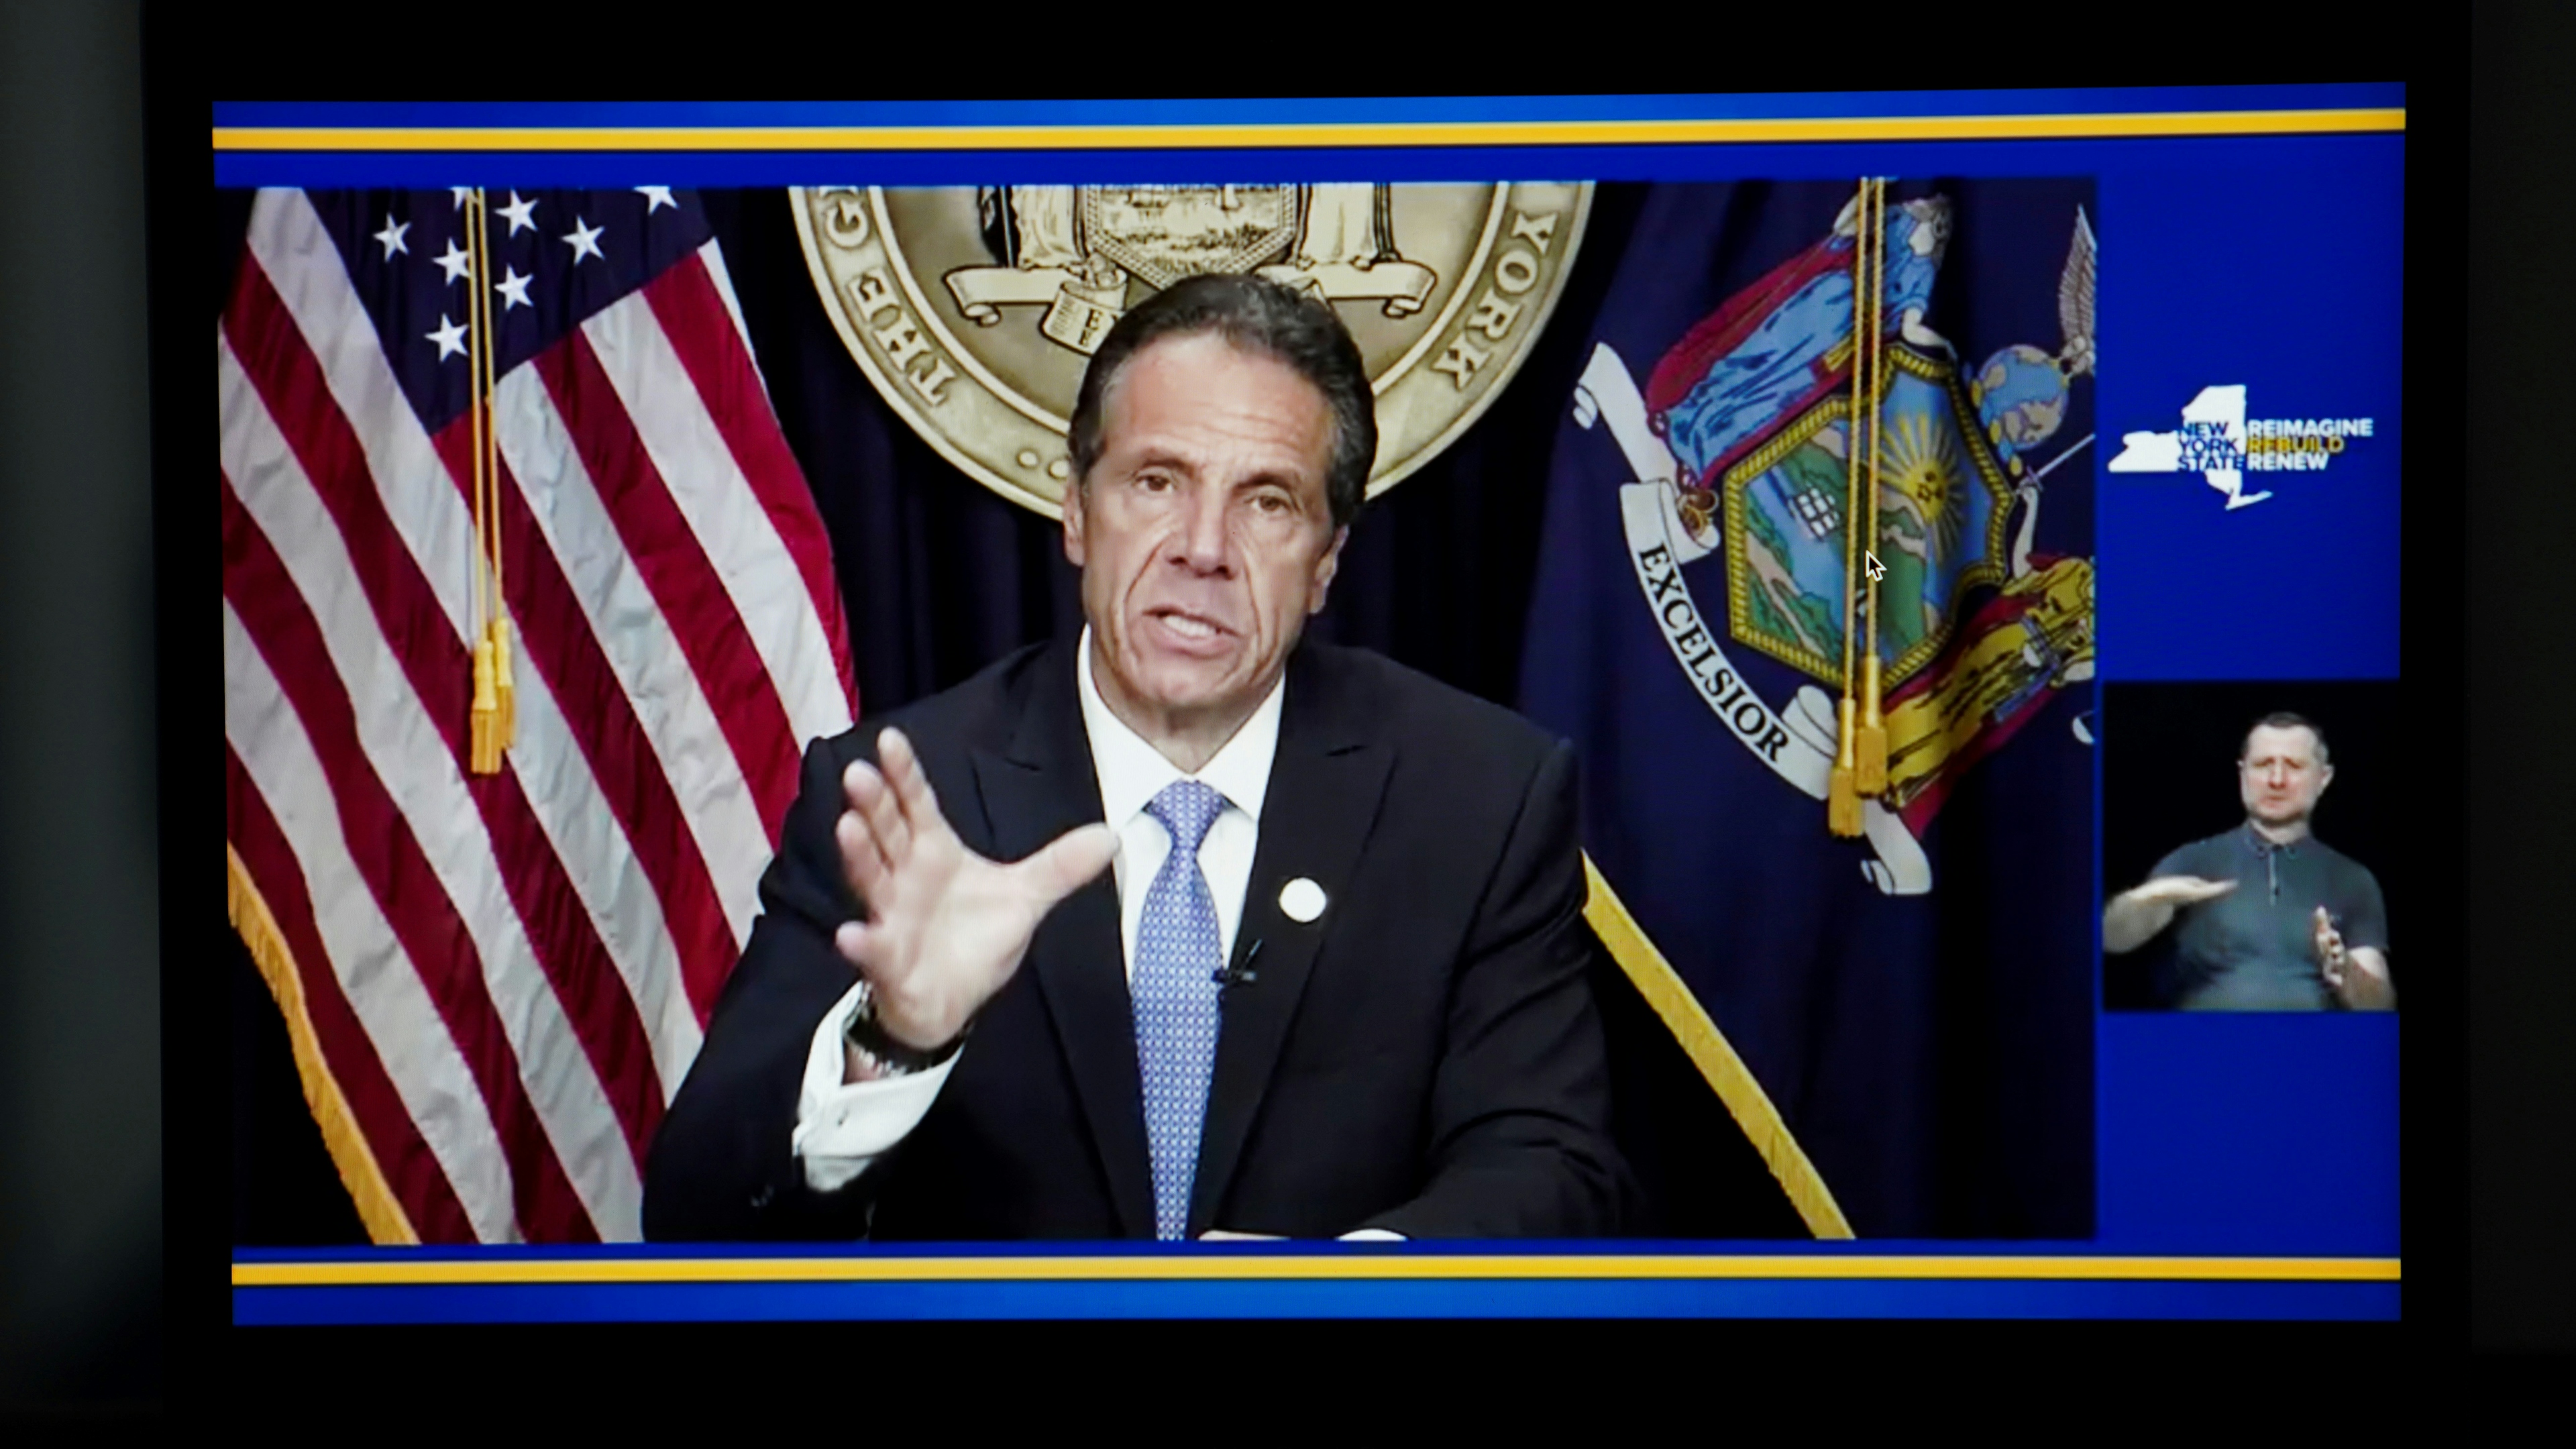 Photo taken from a video in New York, the United States, shows New York Governor Andrew Cuomo speaking during a televised address